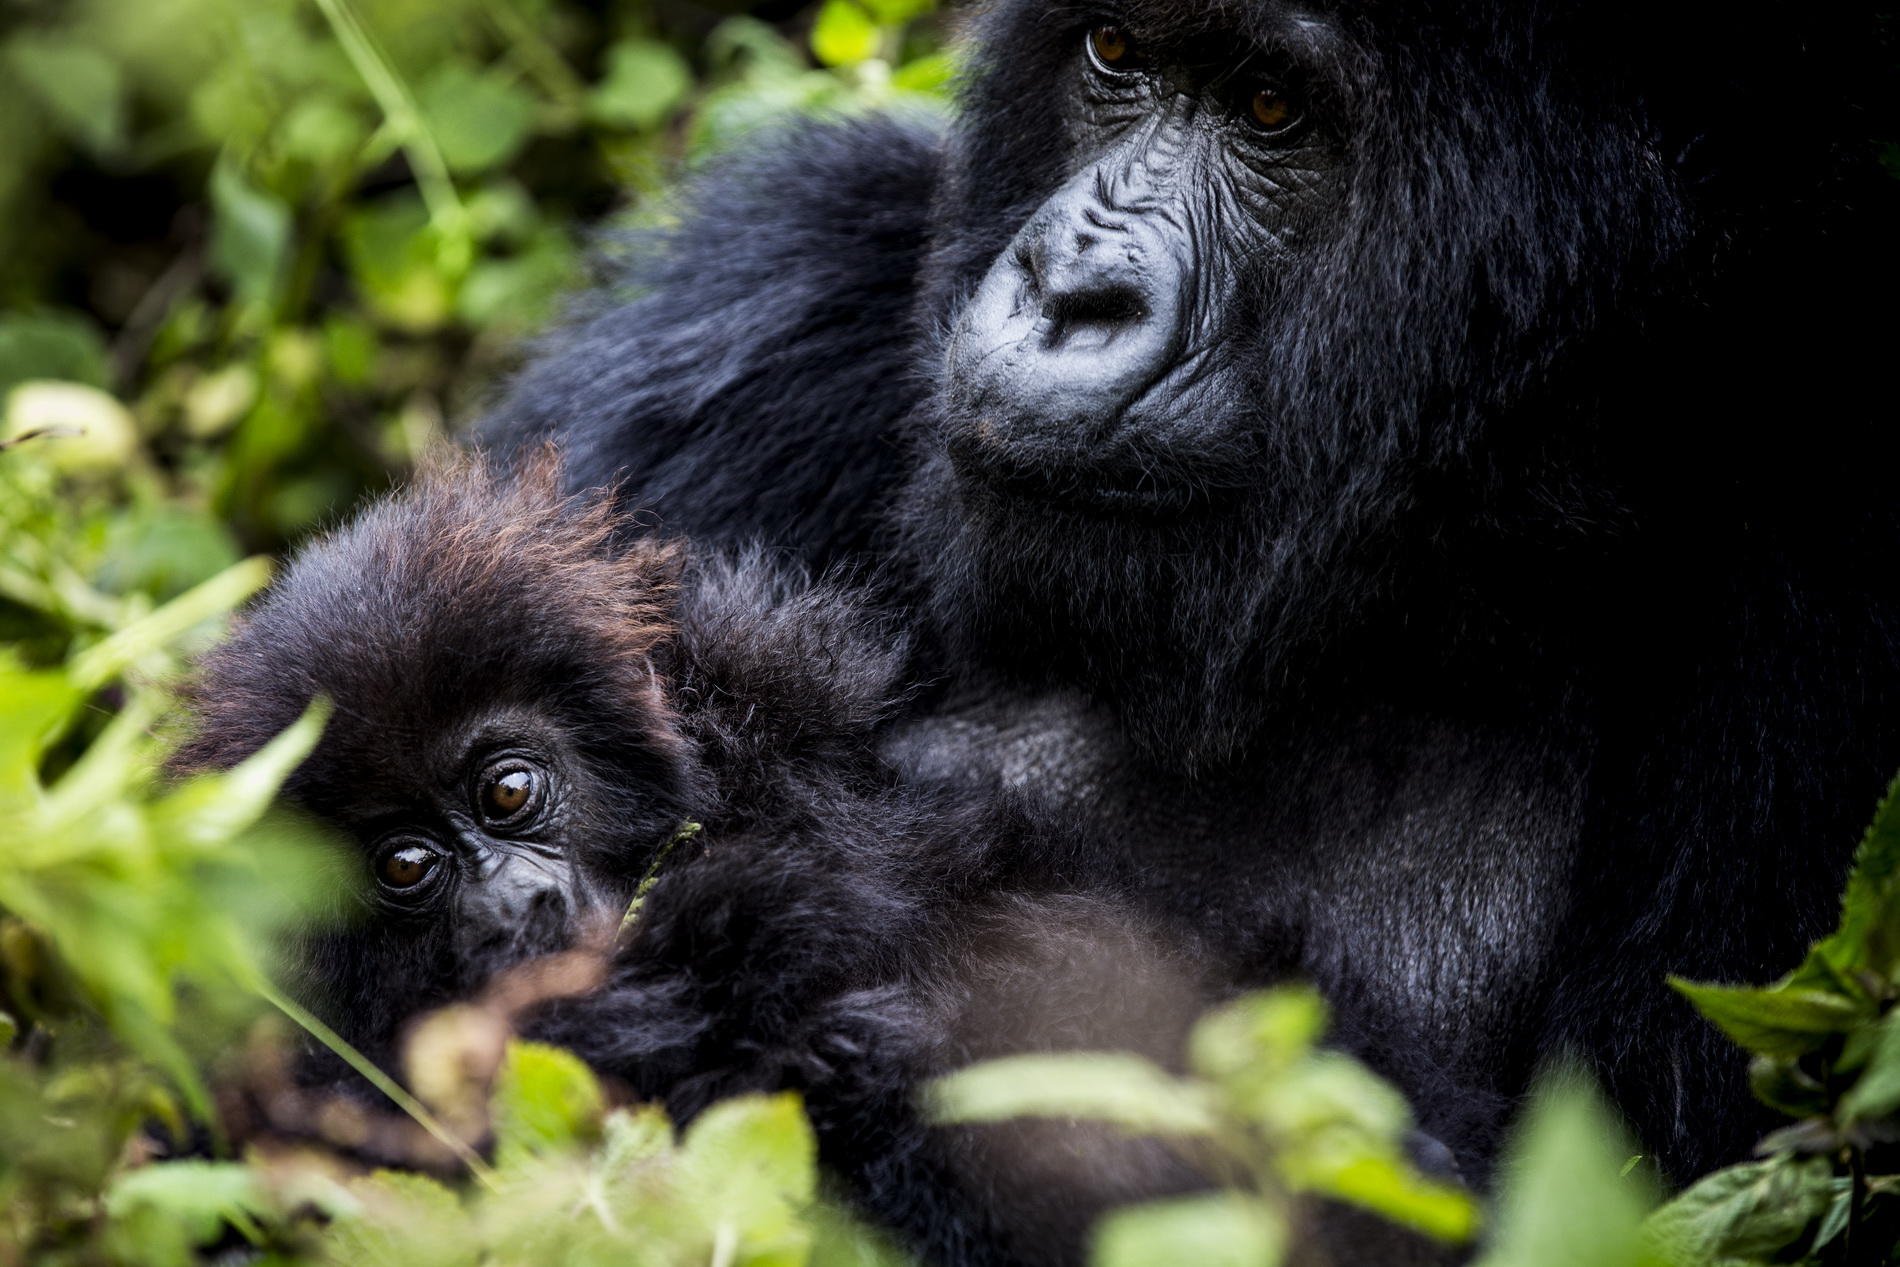 A gorilla and her baby seen an exersion at Bisate Lodge by Wilderness